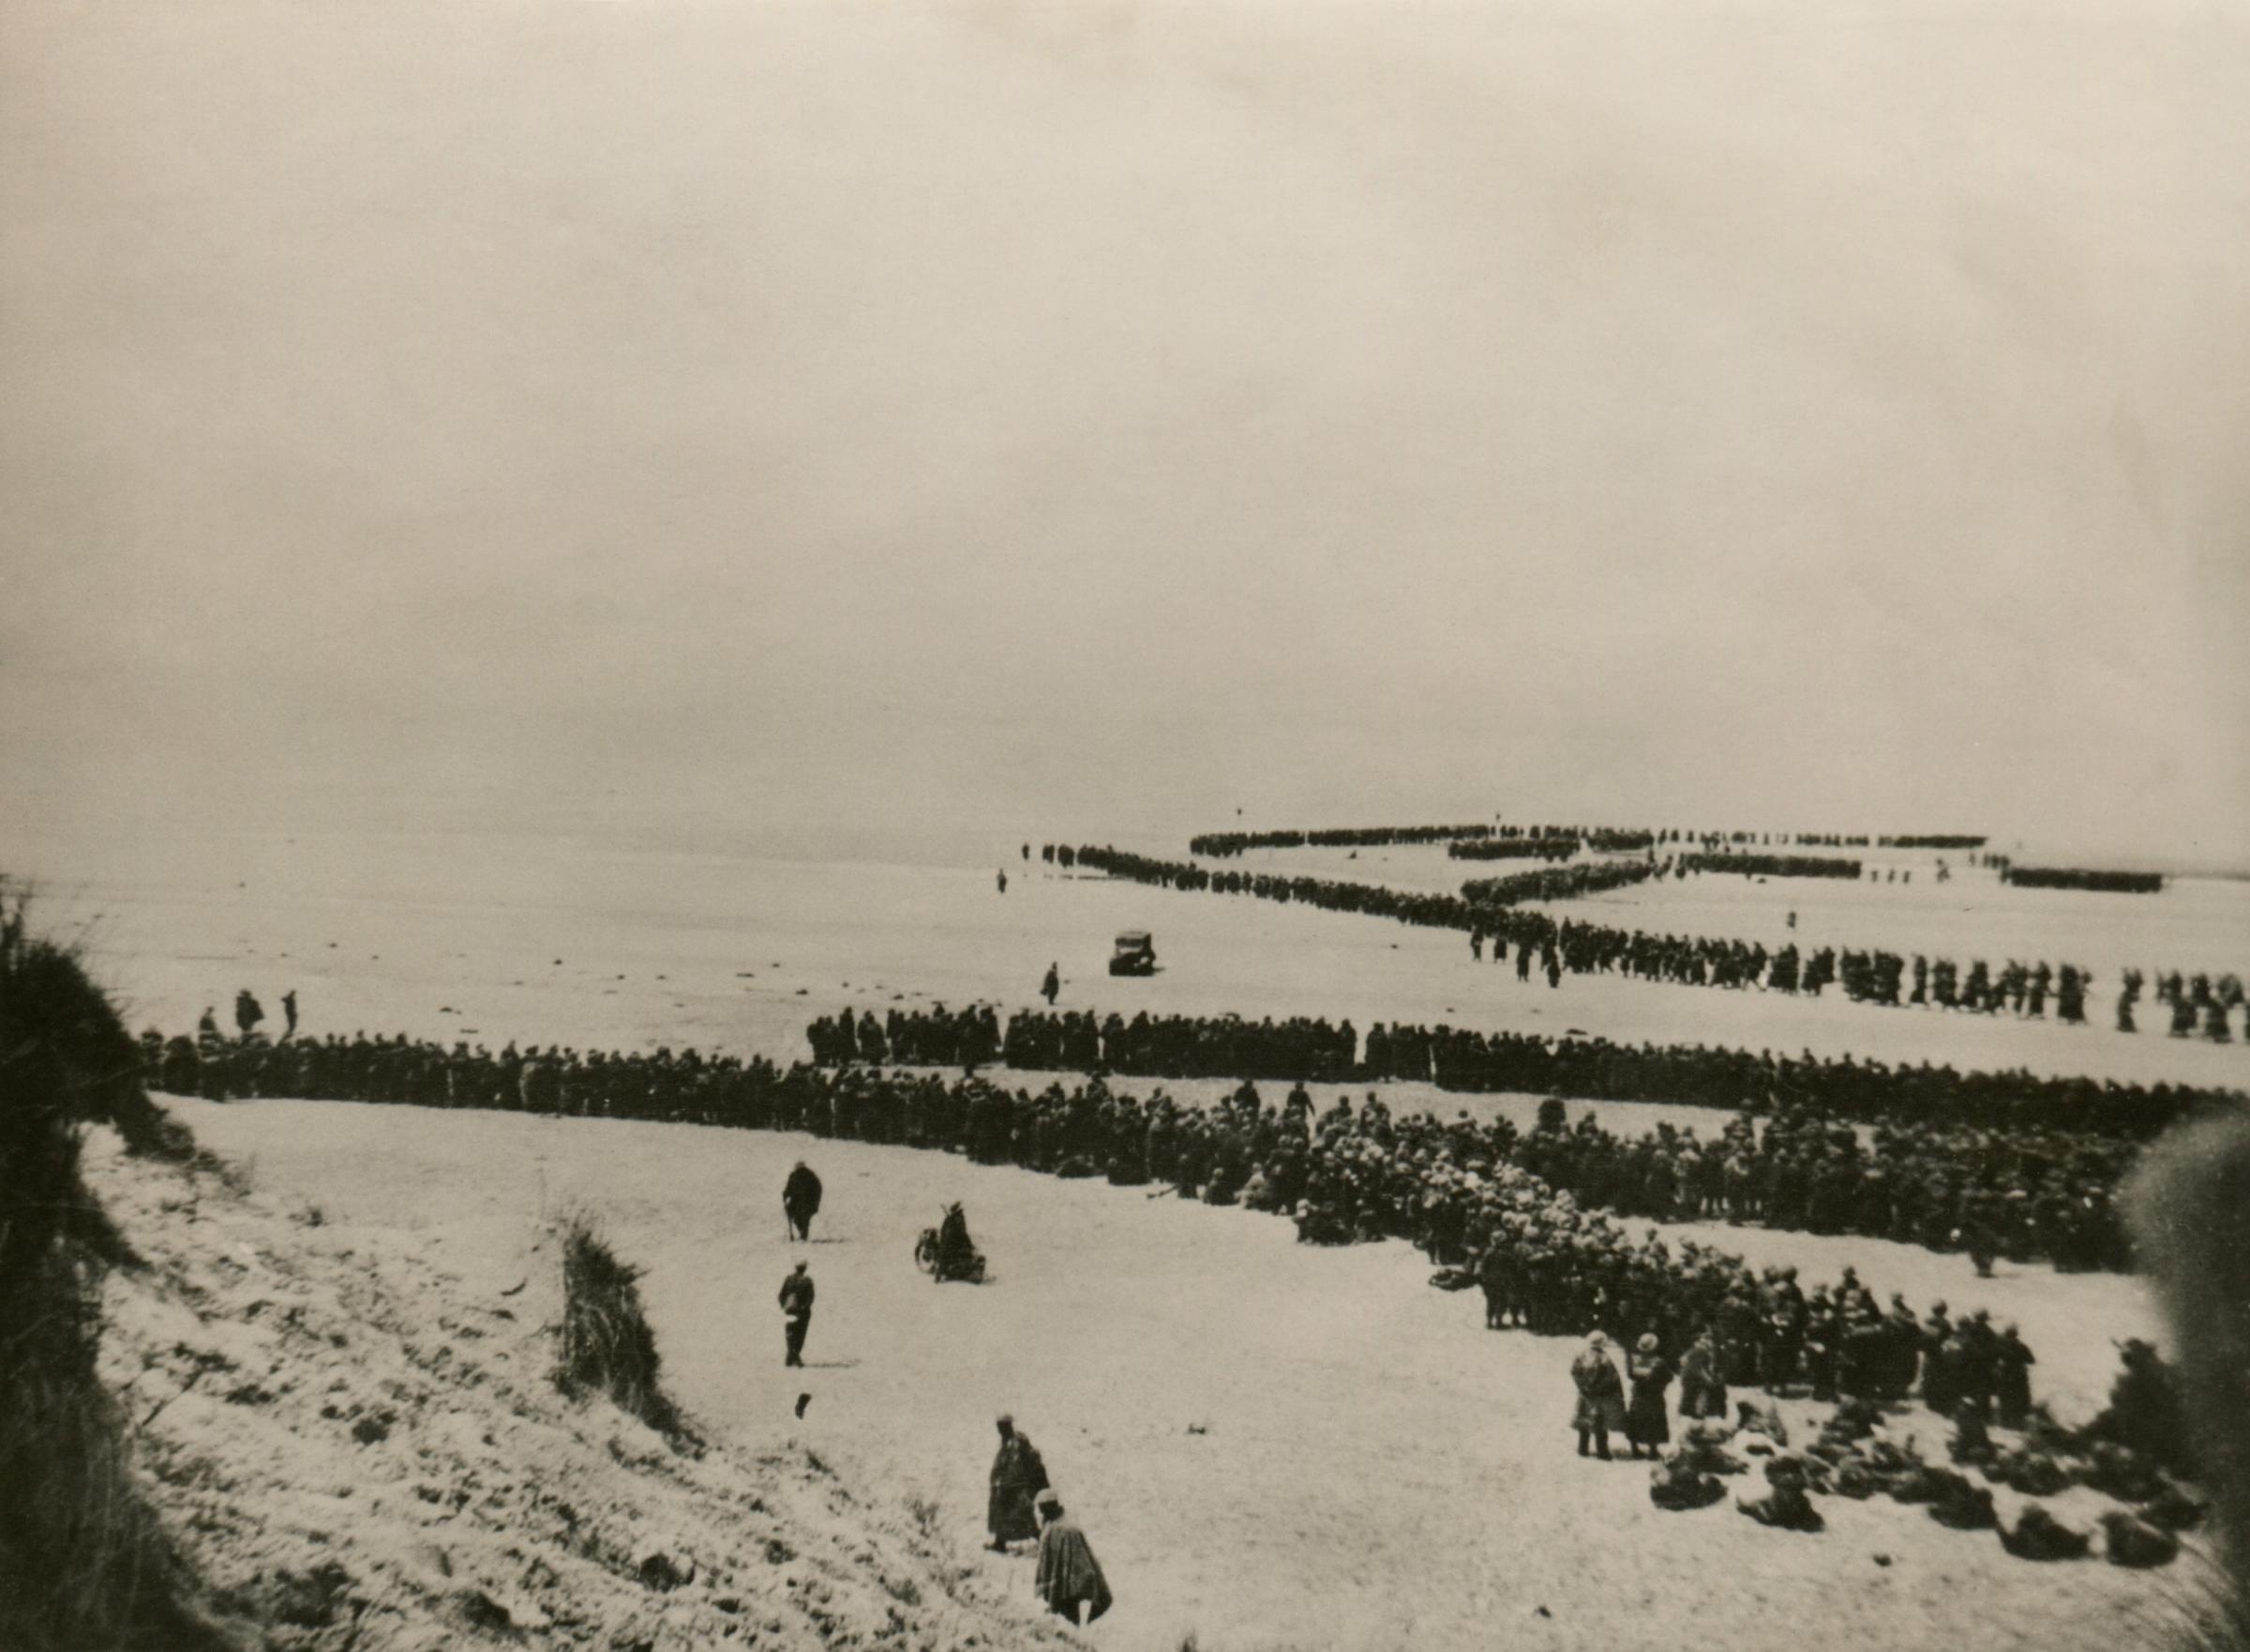 Military evacuation of Dunkirk during World War 2. Thousands of British and French troops wait on the dunes of Dunkirk beach for transport to England. May 26-June 4, 1940.; Shutterstock ID 251930563; Purchase Order: HERALD NEWS 19/5/19; Job: BATTLE OF